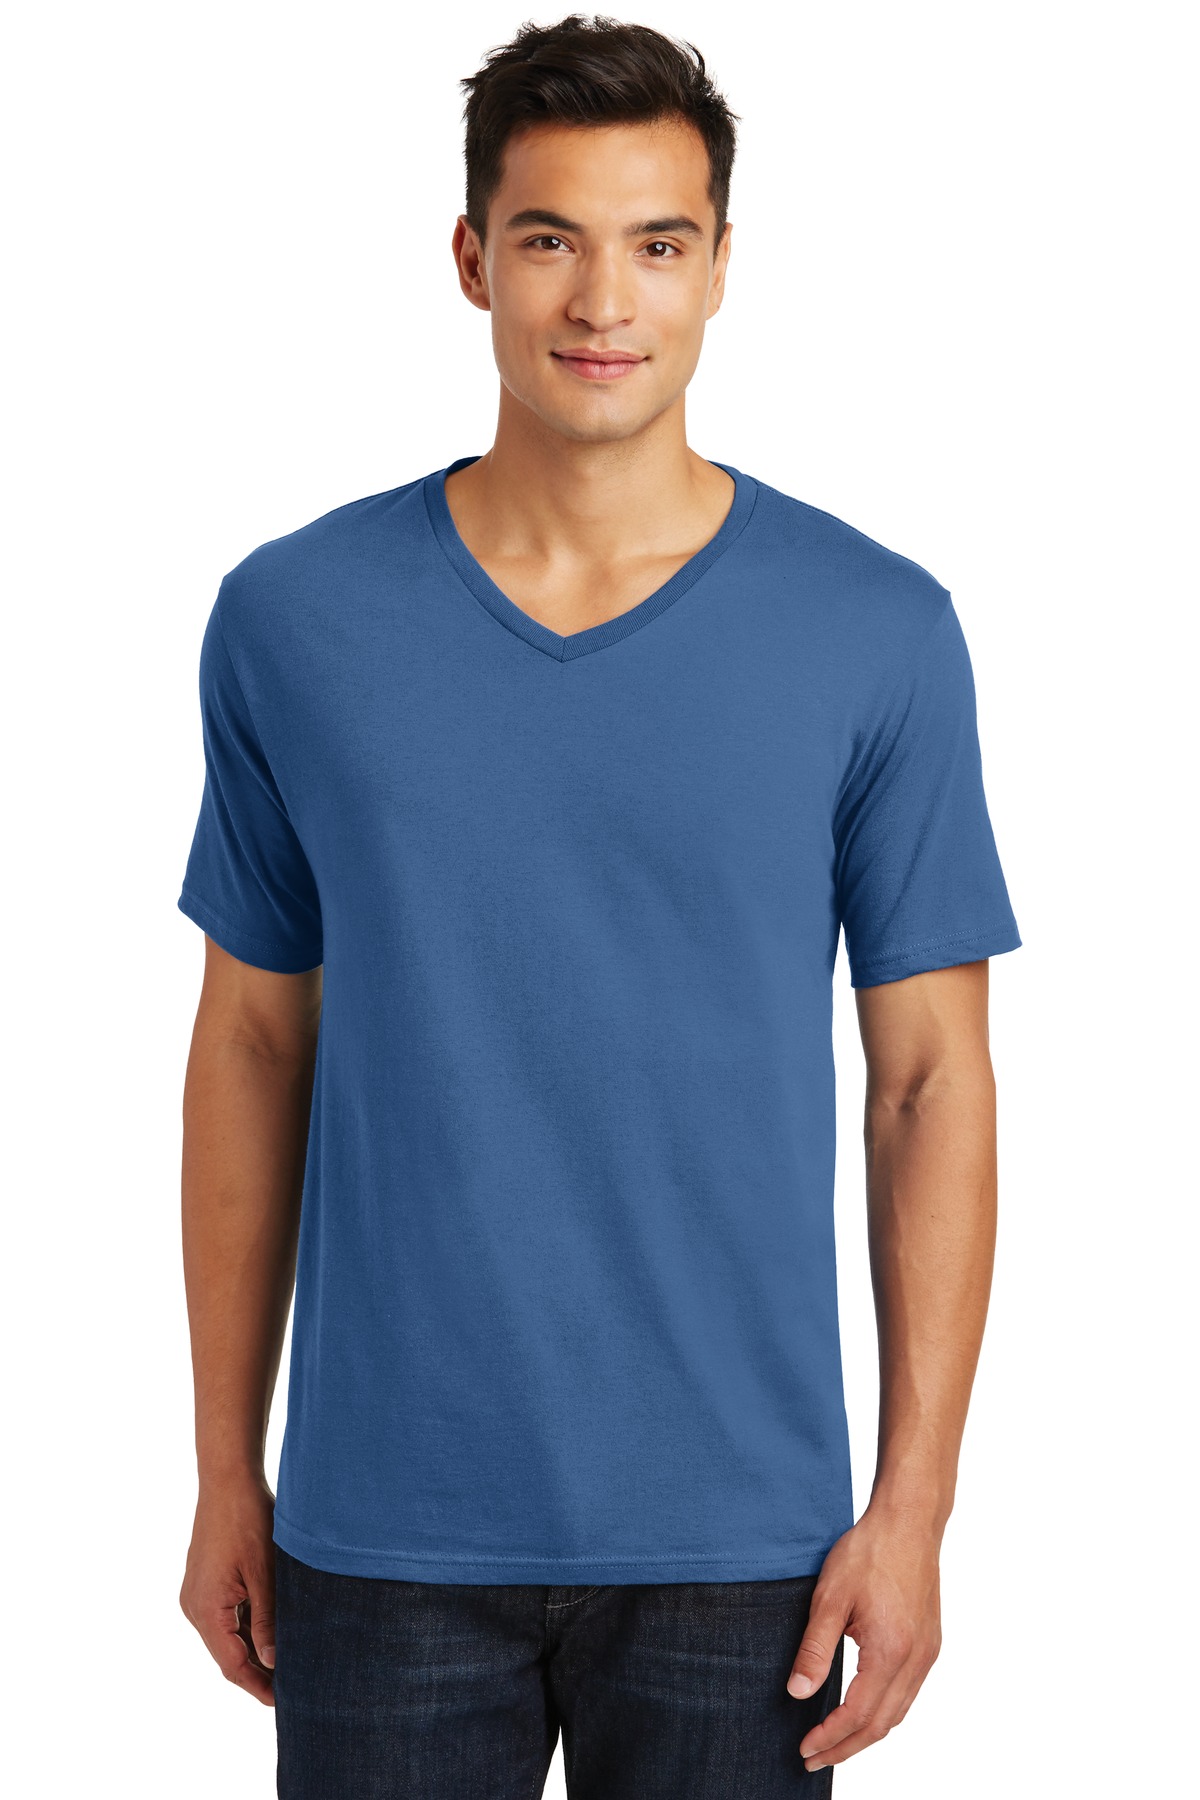 District DT1170 | Mens Perfect Weight ® V-Neck Tee | ShirtSpace